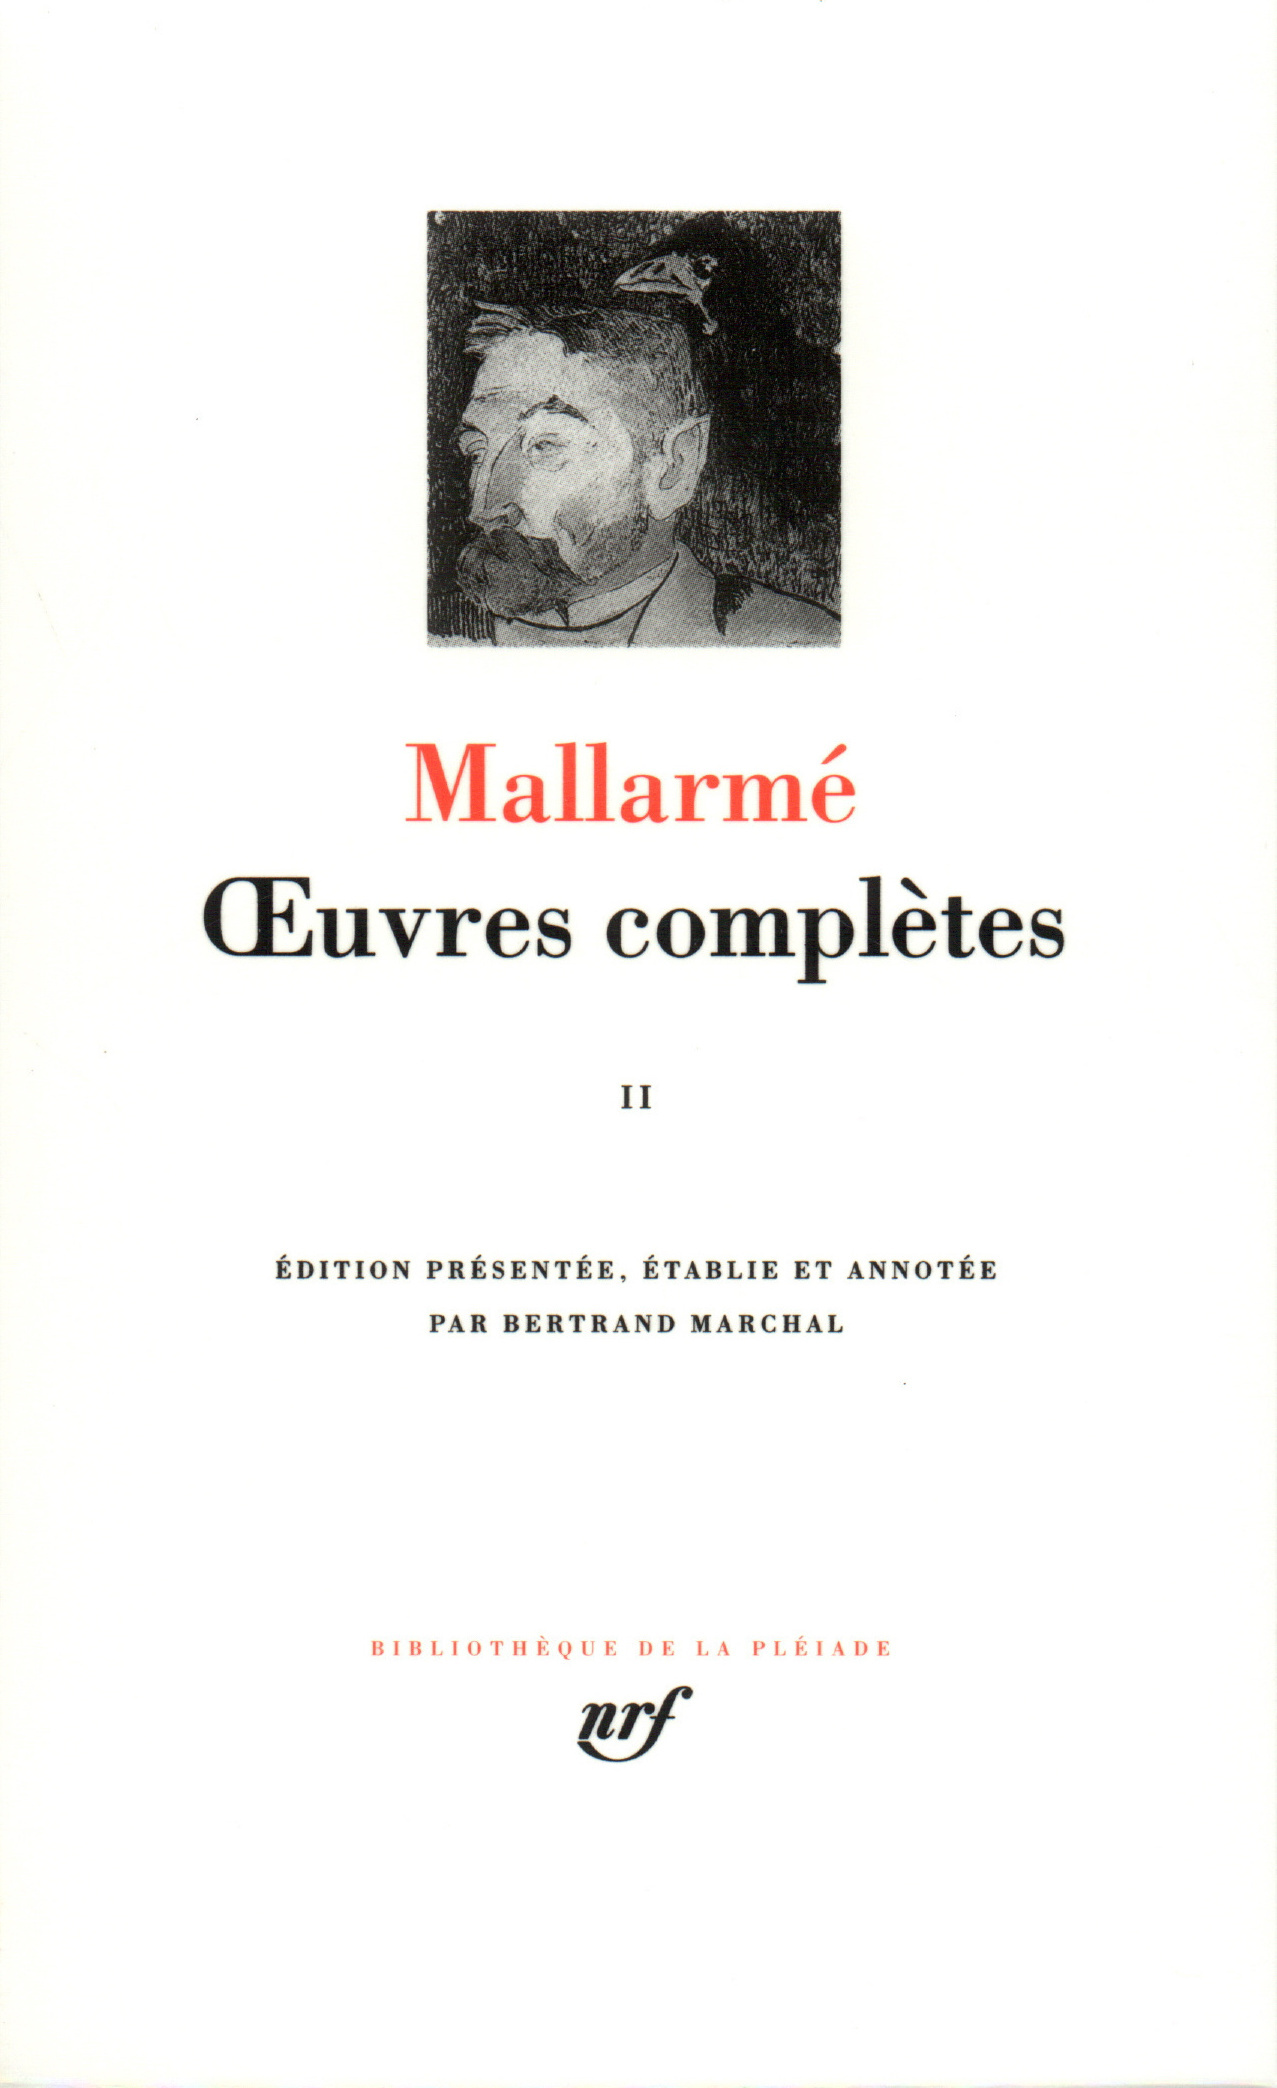 Œuvres complètes (9782070115594-front-cover)